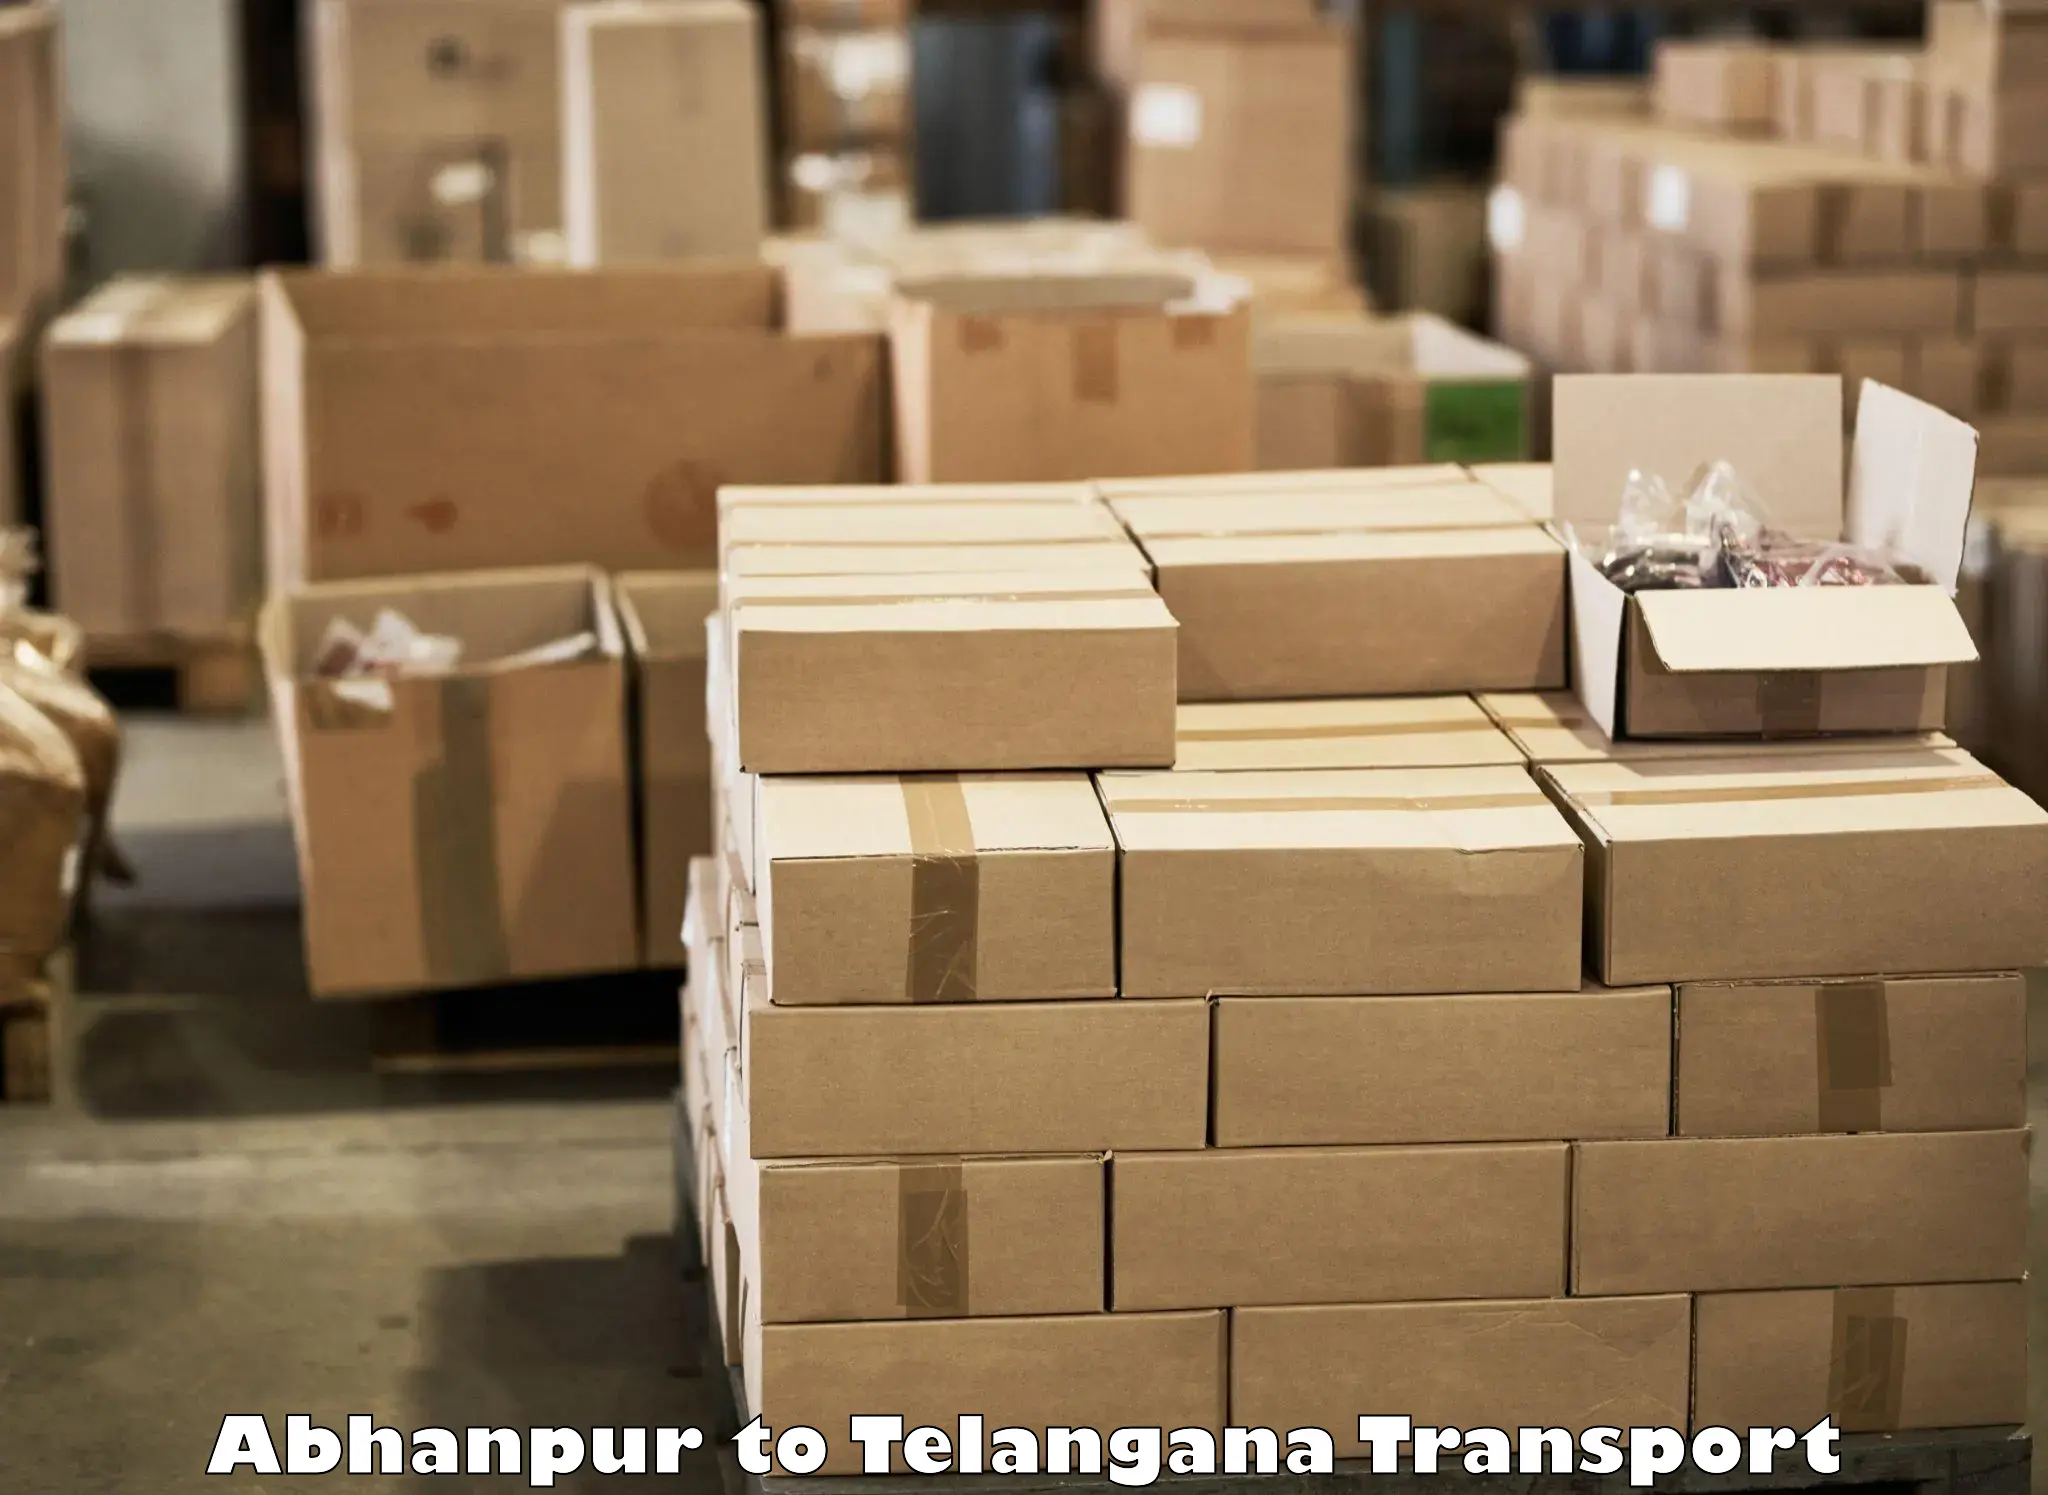 Container transport service in Abhanpur to Ghanpur